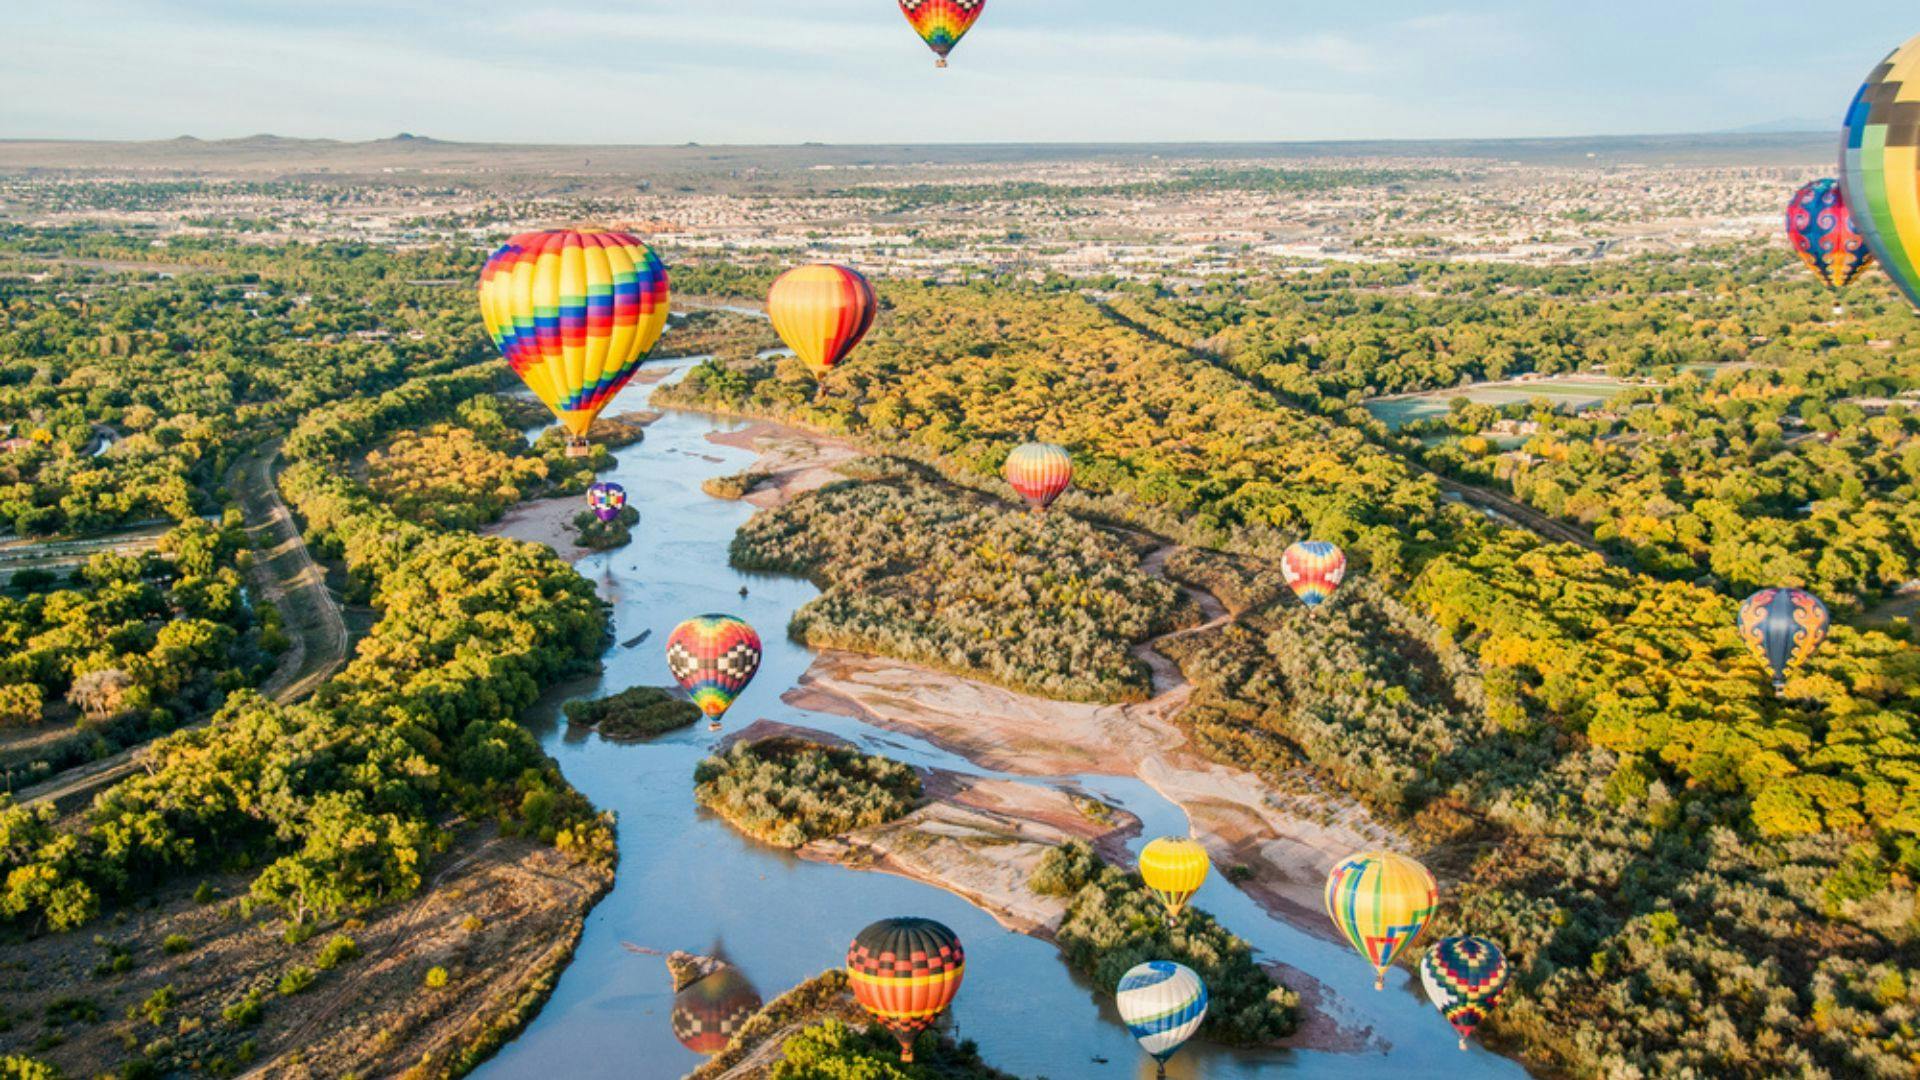 a stock image of a dozen multi-colored hot air balloons in flight over New Mexico.